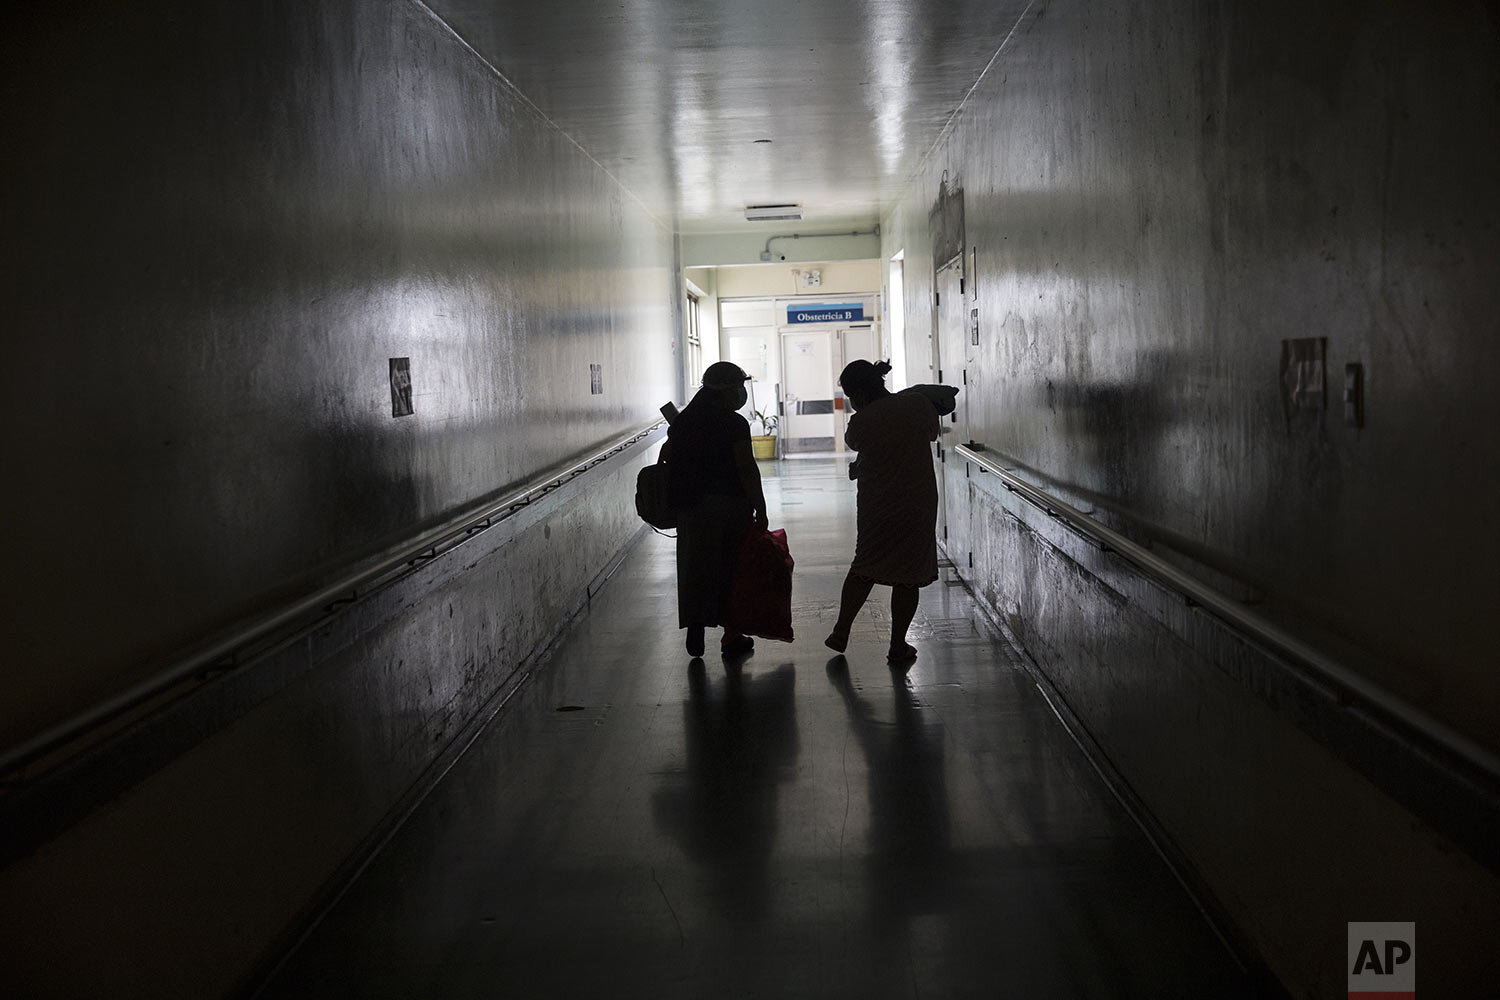  With the aid of her mother, a woman and her newborn baby leave the National Maternal Perinatal Institute, in Lima, Peru, Monday, July 13, 2020. (AP Photo/Rodrigo Abd) 